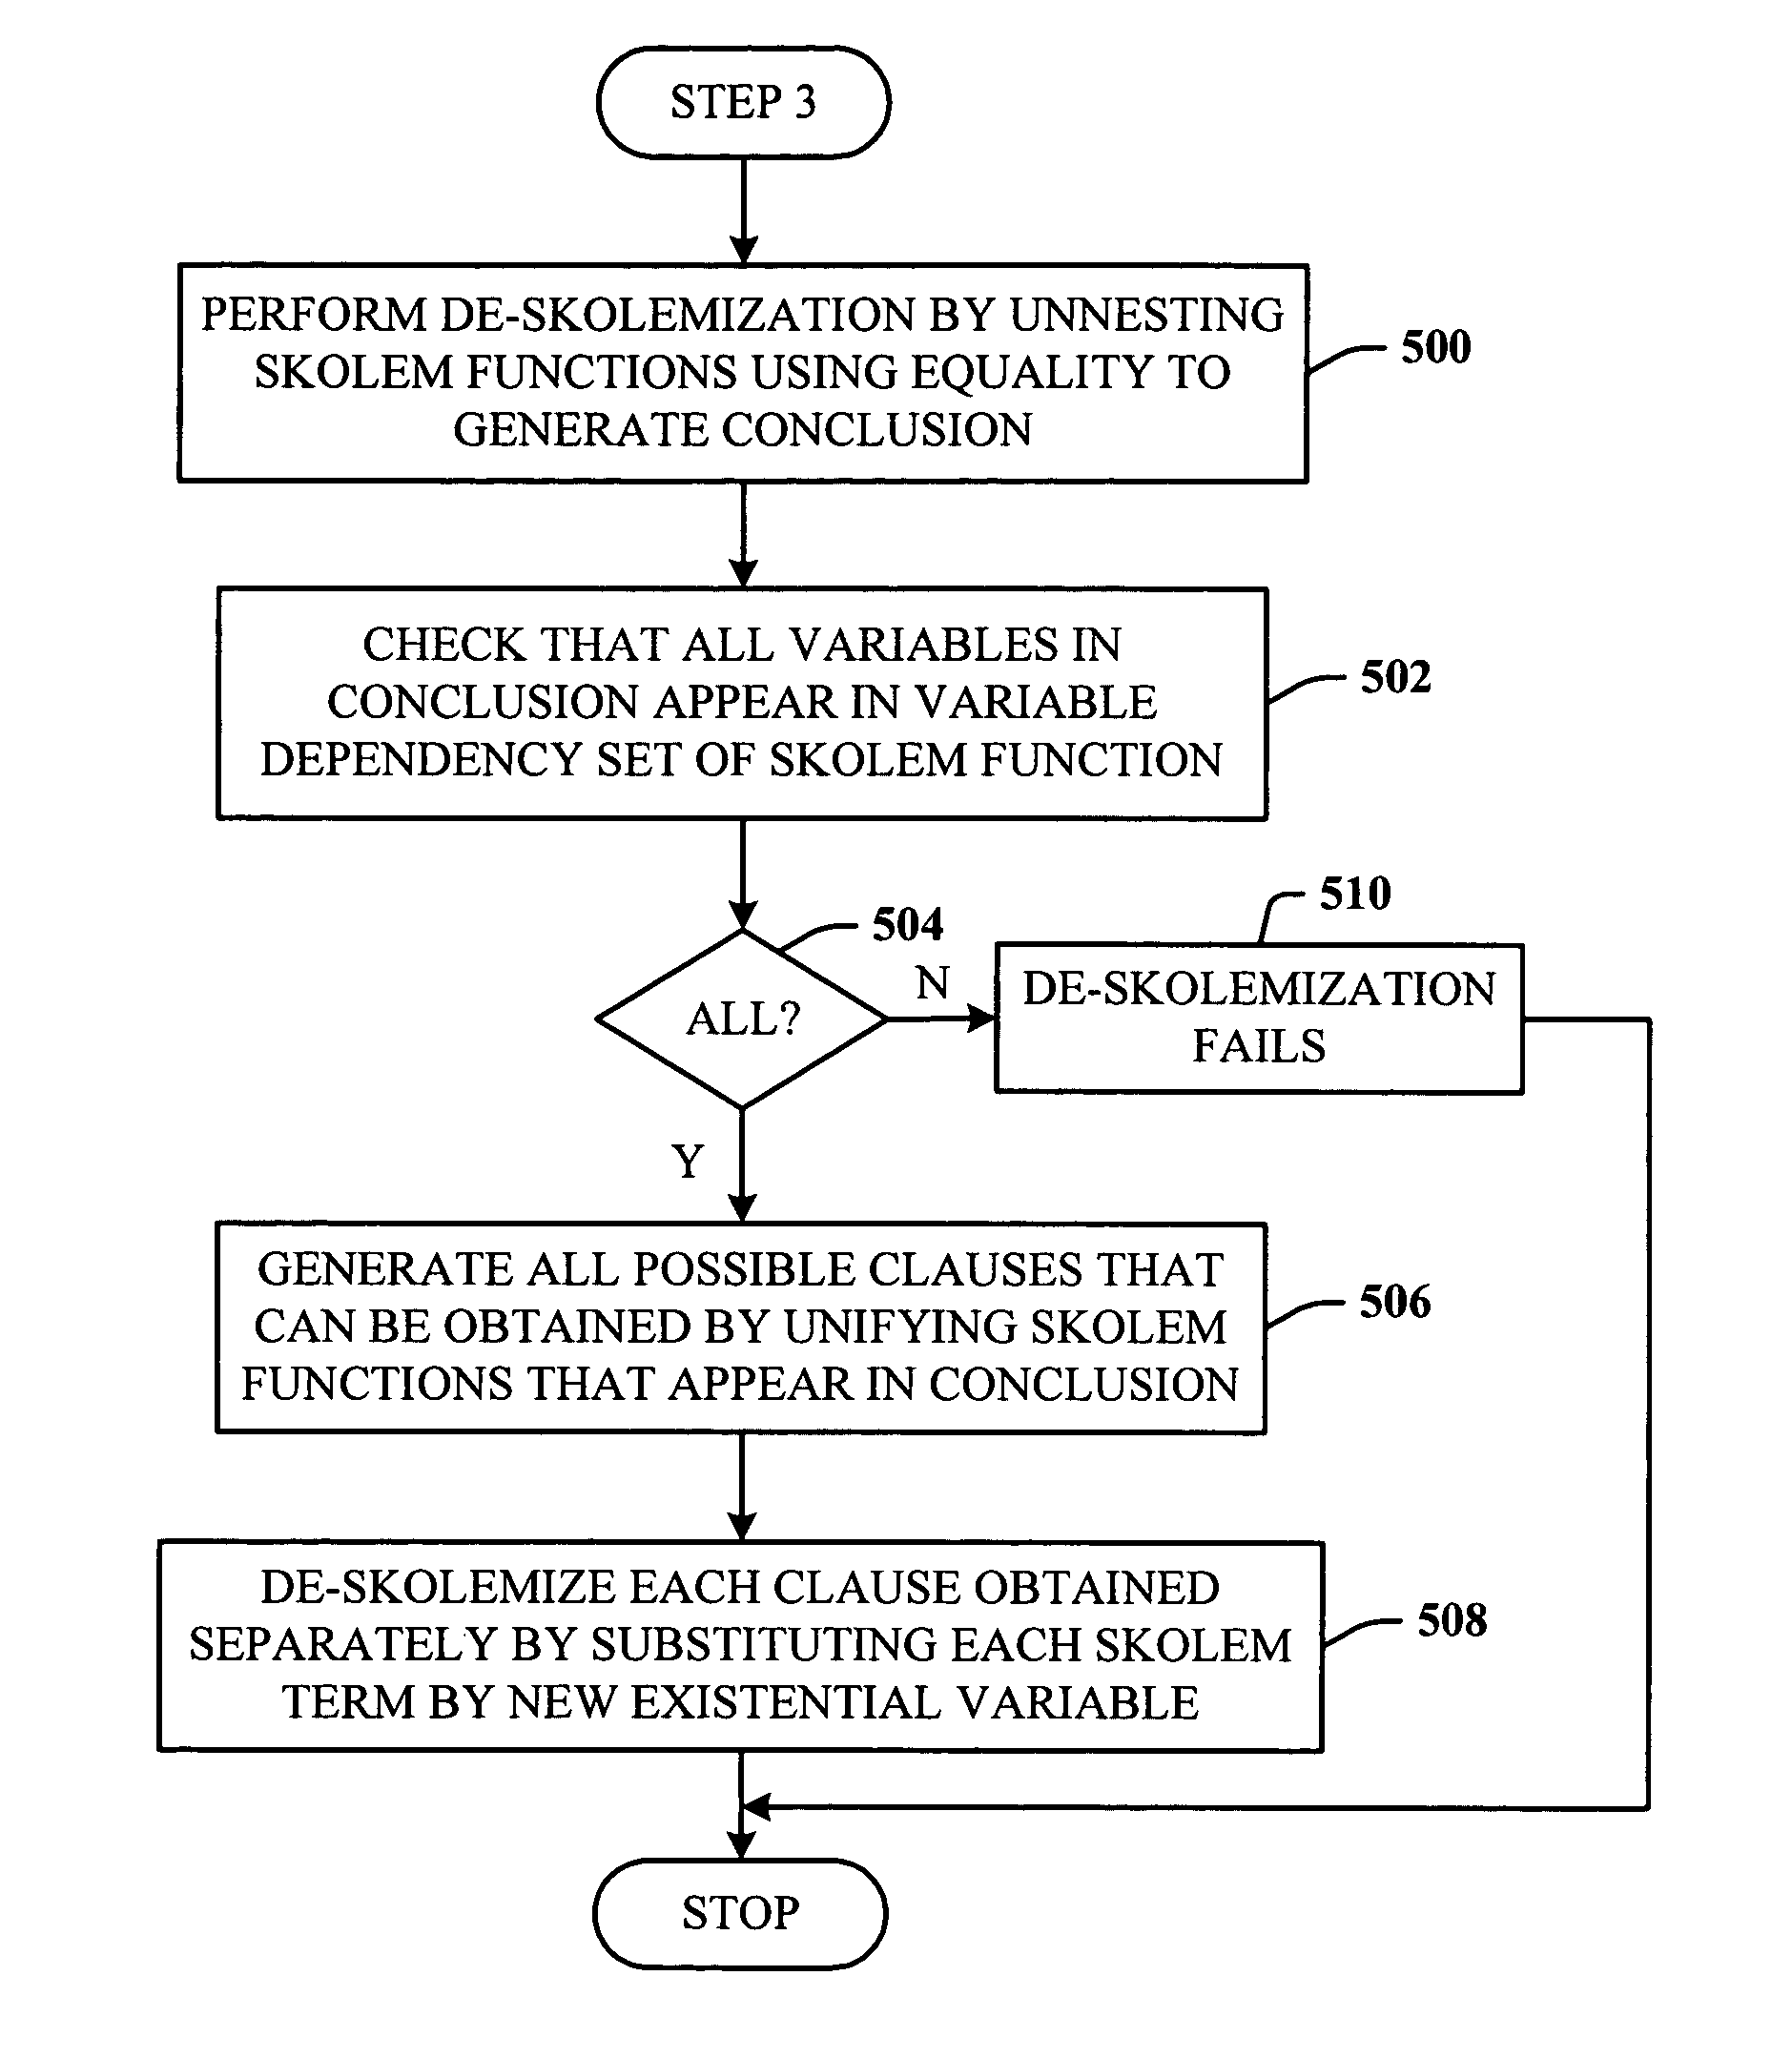 System and method for composition of mappings given by dependencies